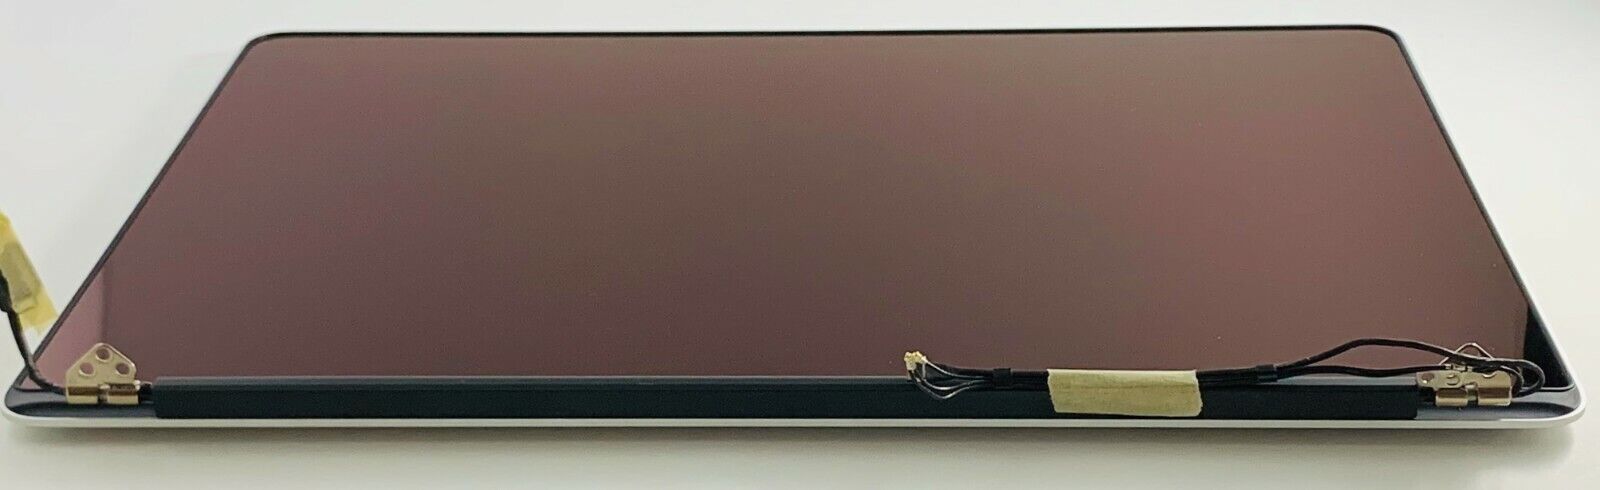 REAL genuine MacBook Pro Retina 15" A1398 2015 LCD Express shipping for parts